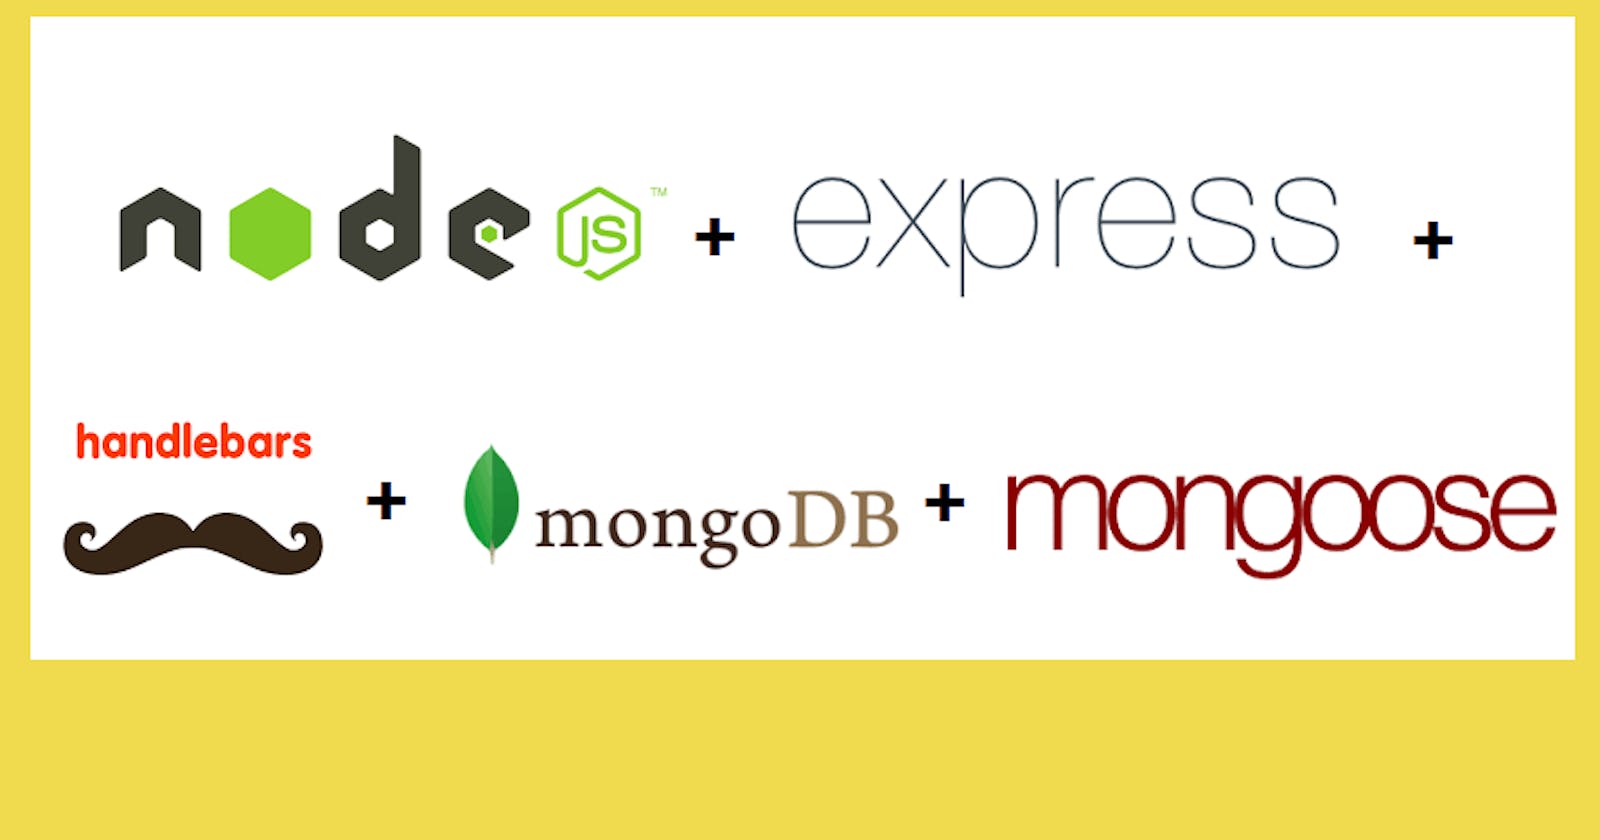 NodeJS Application with Express - Handlebars and Mongoose - Parse Objects